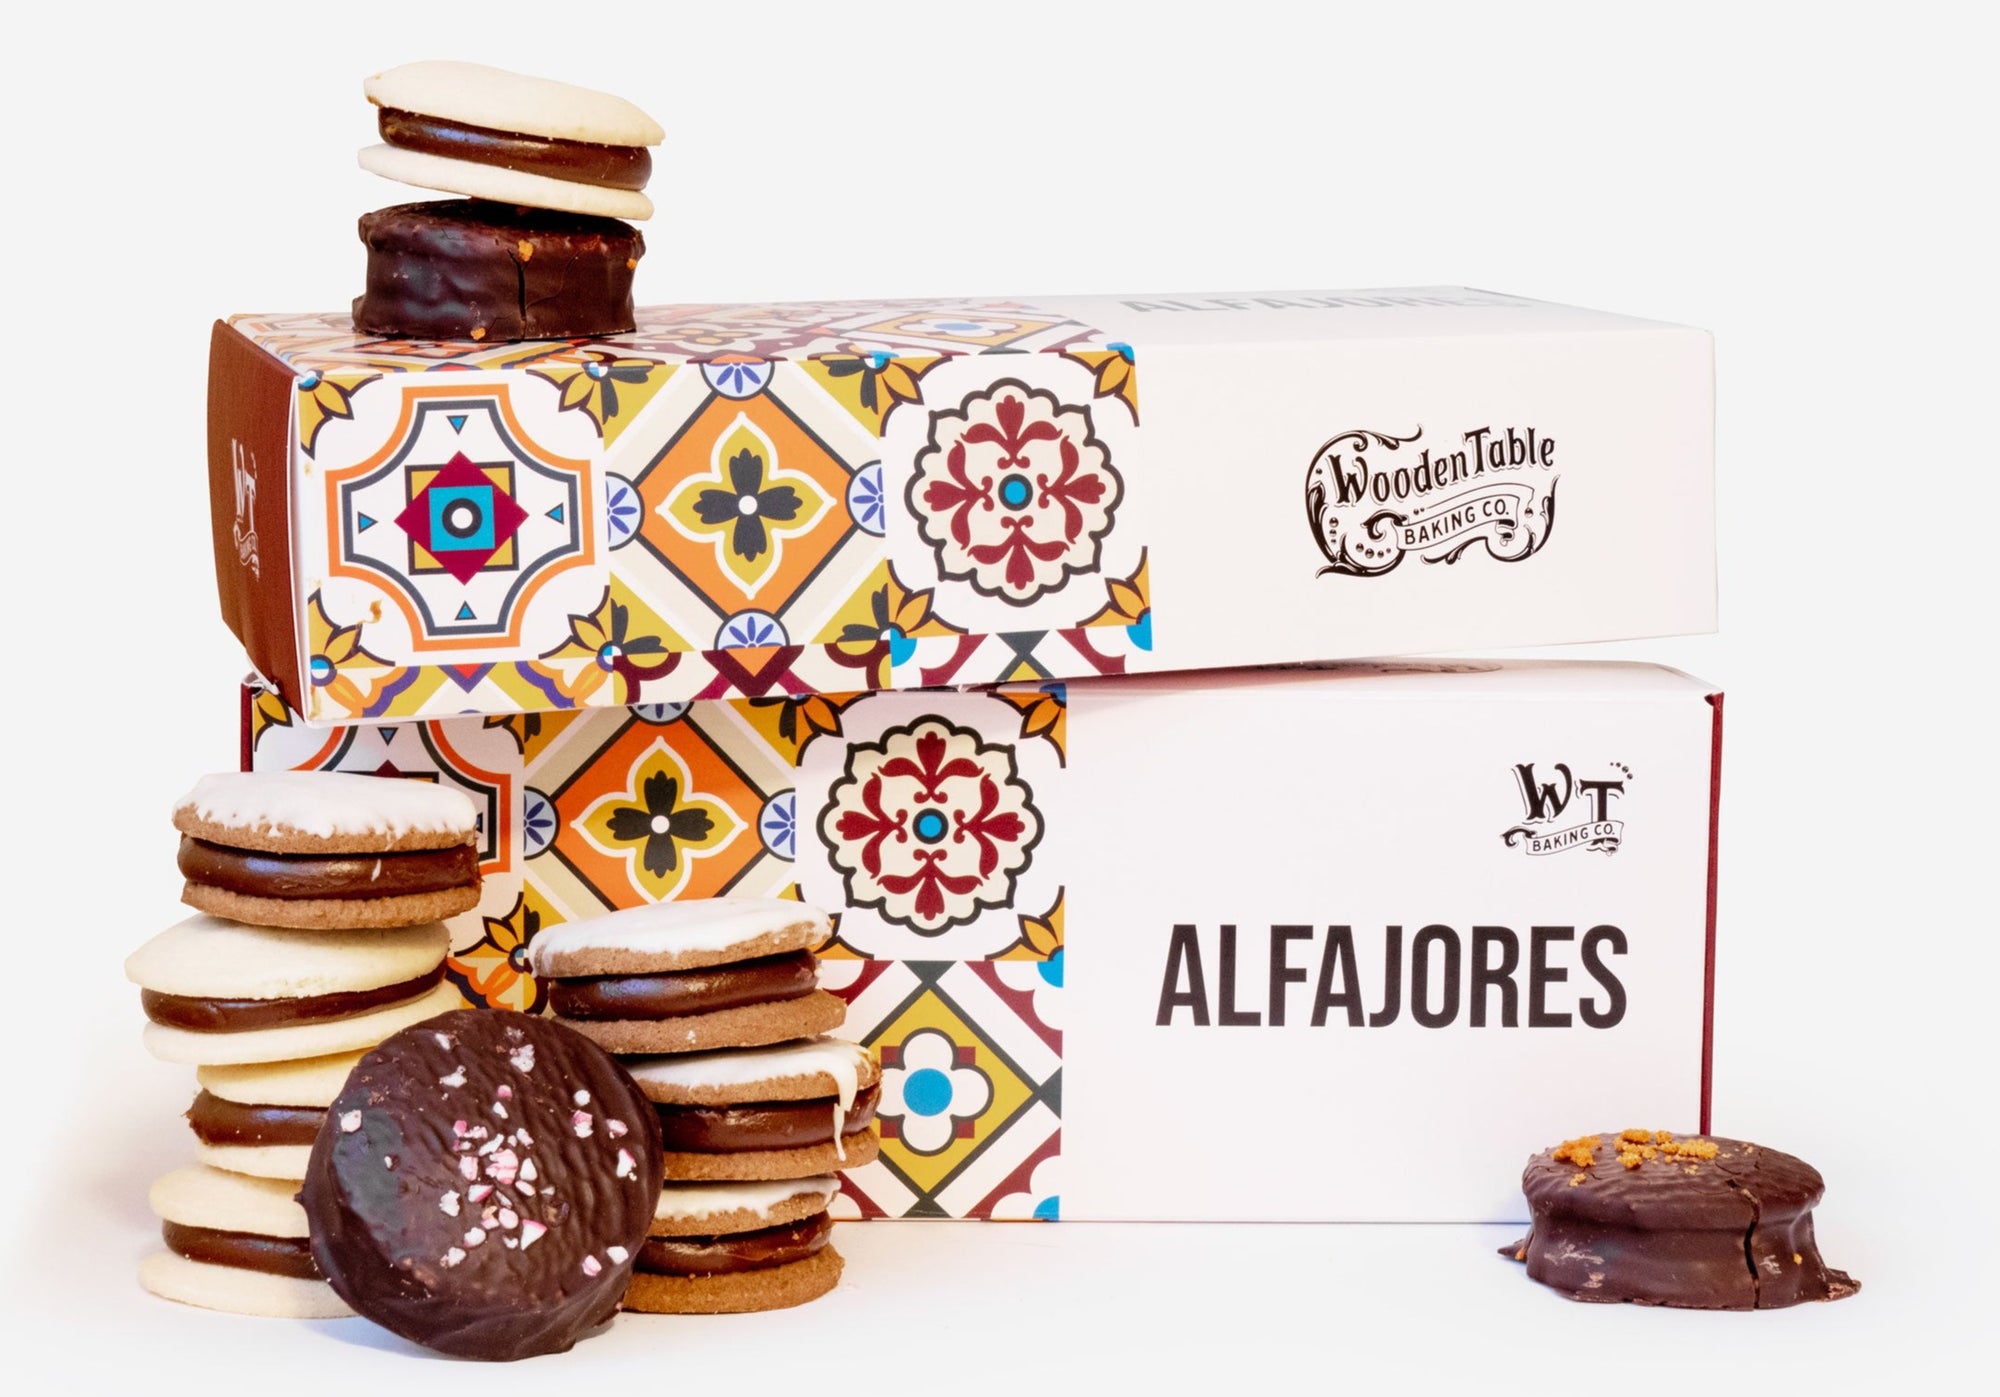 Two Baker's Best Boxes: Assorted Alfajores & Cookies Wooden Table Baking Co.